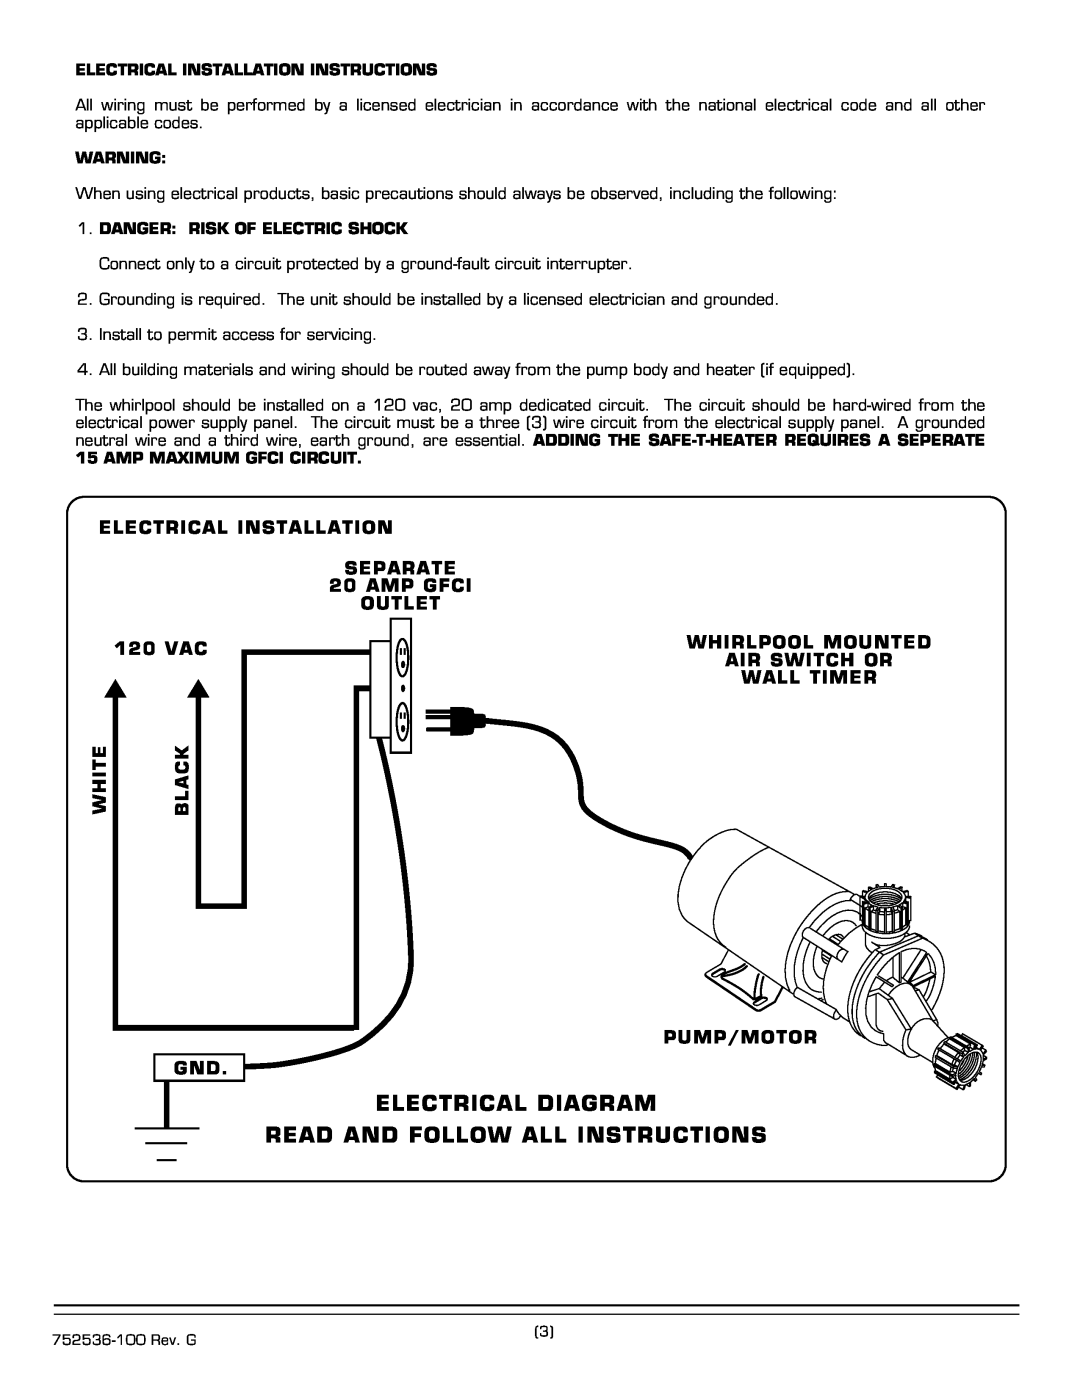 American Standard 2775.XXXW Series installation instructions Electrical Diagram, Read And Follow All Instructions 